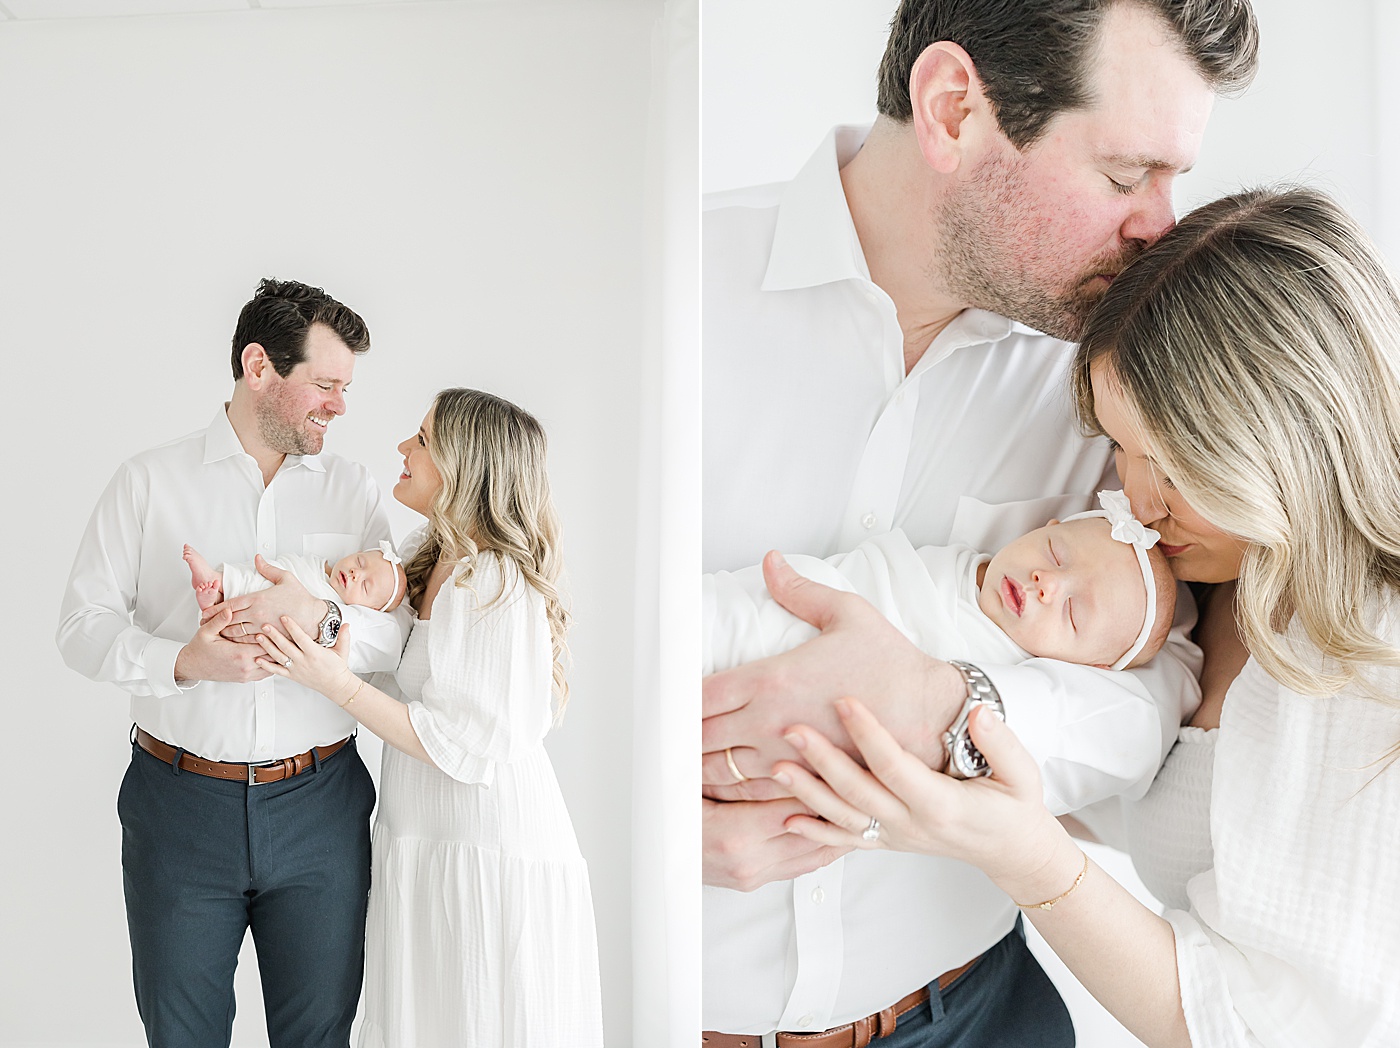 Studio newborn session for first-time parents with baby girl | Kristin Wood Photography